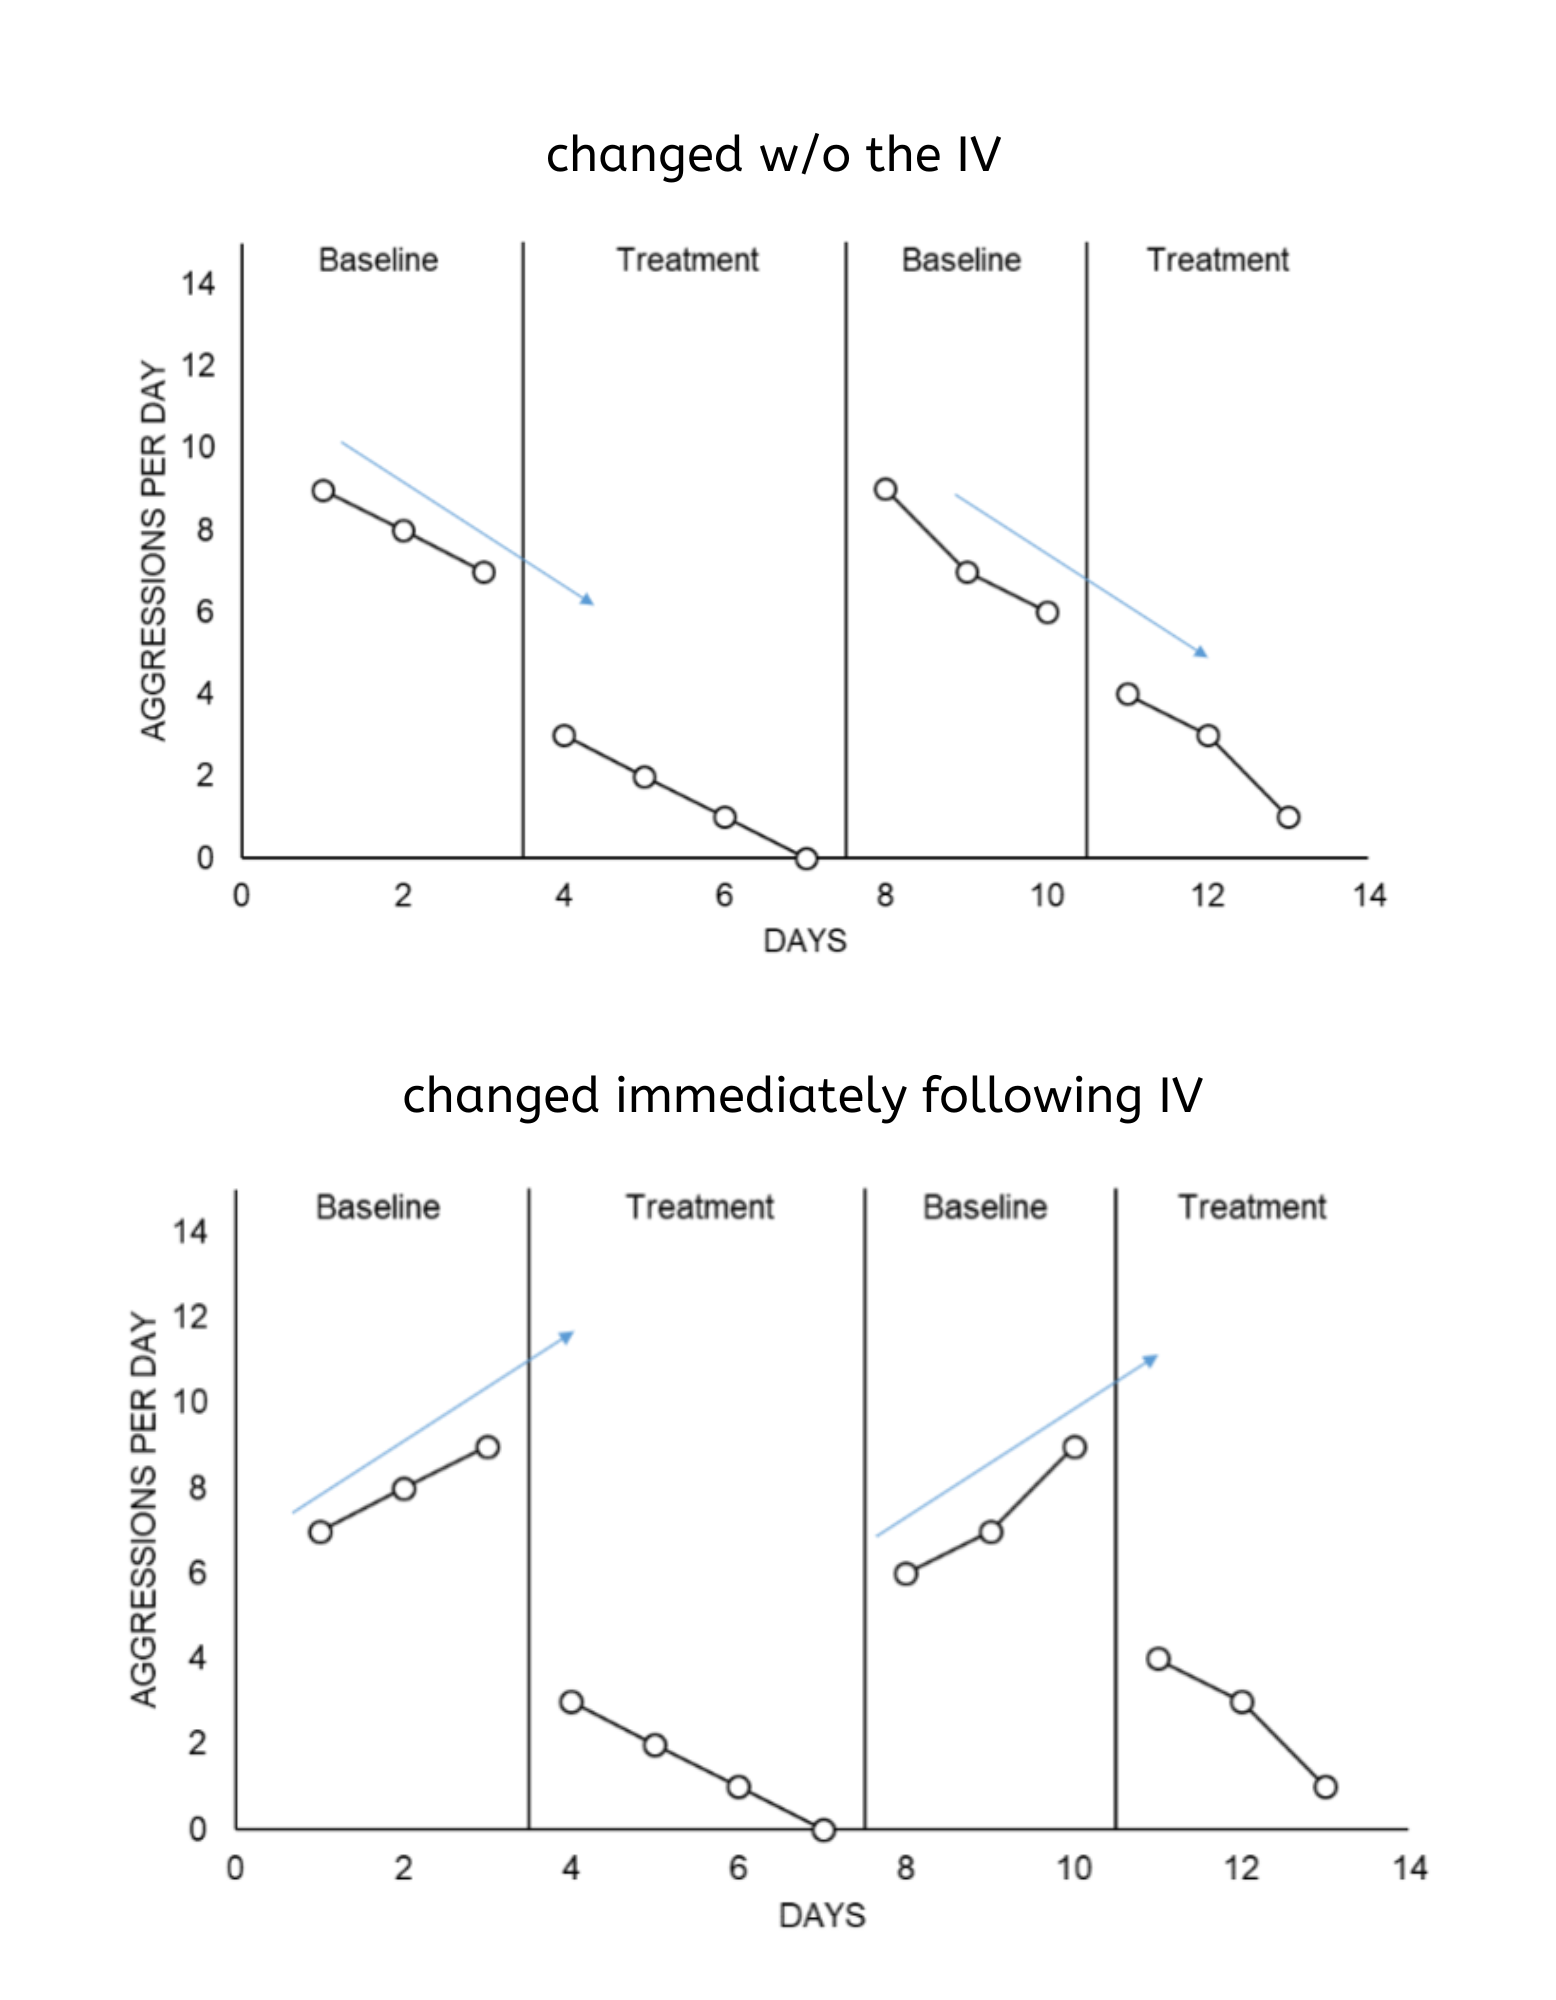 <p>Behavior might have changed w/o the IV or changed direction immediately following IV</p>